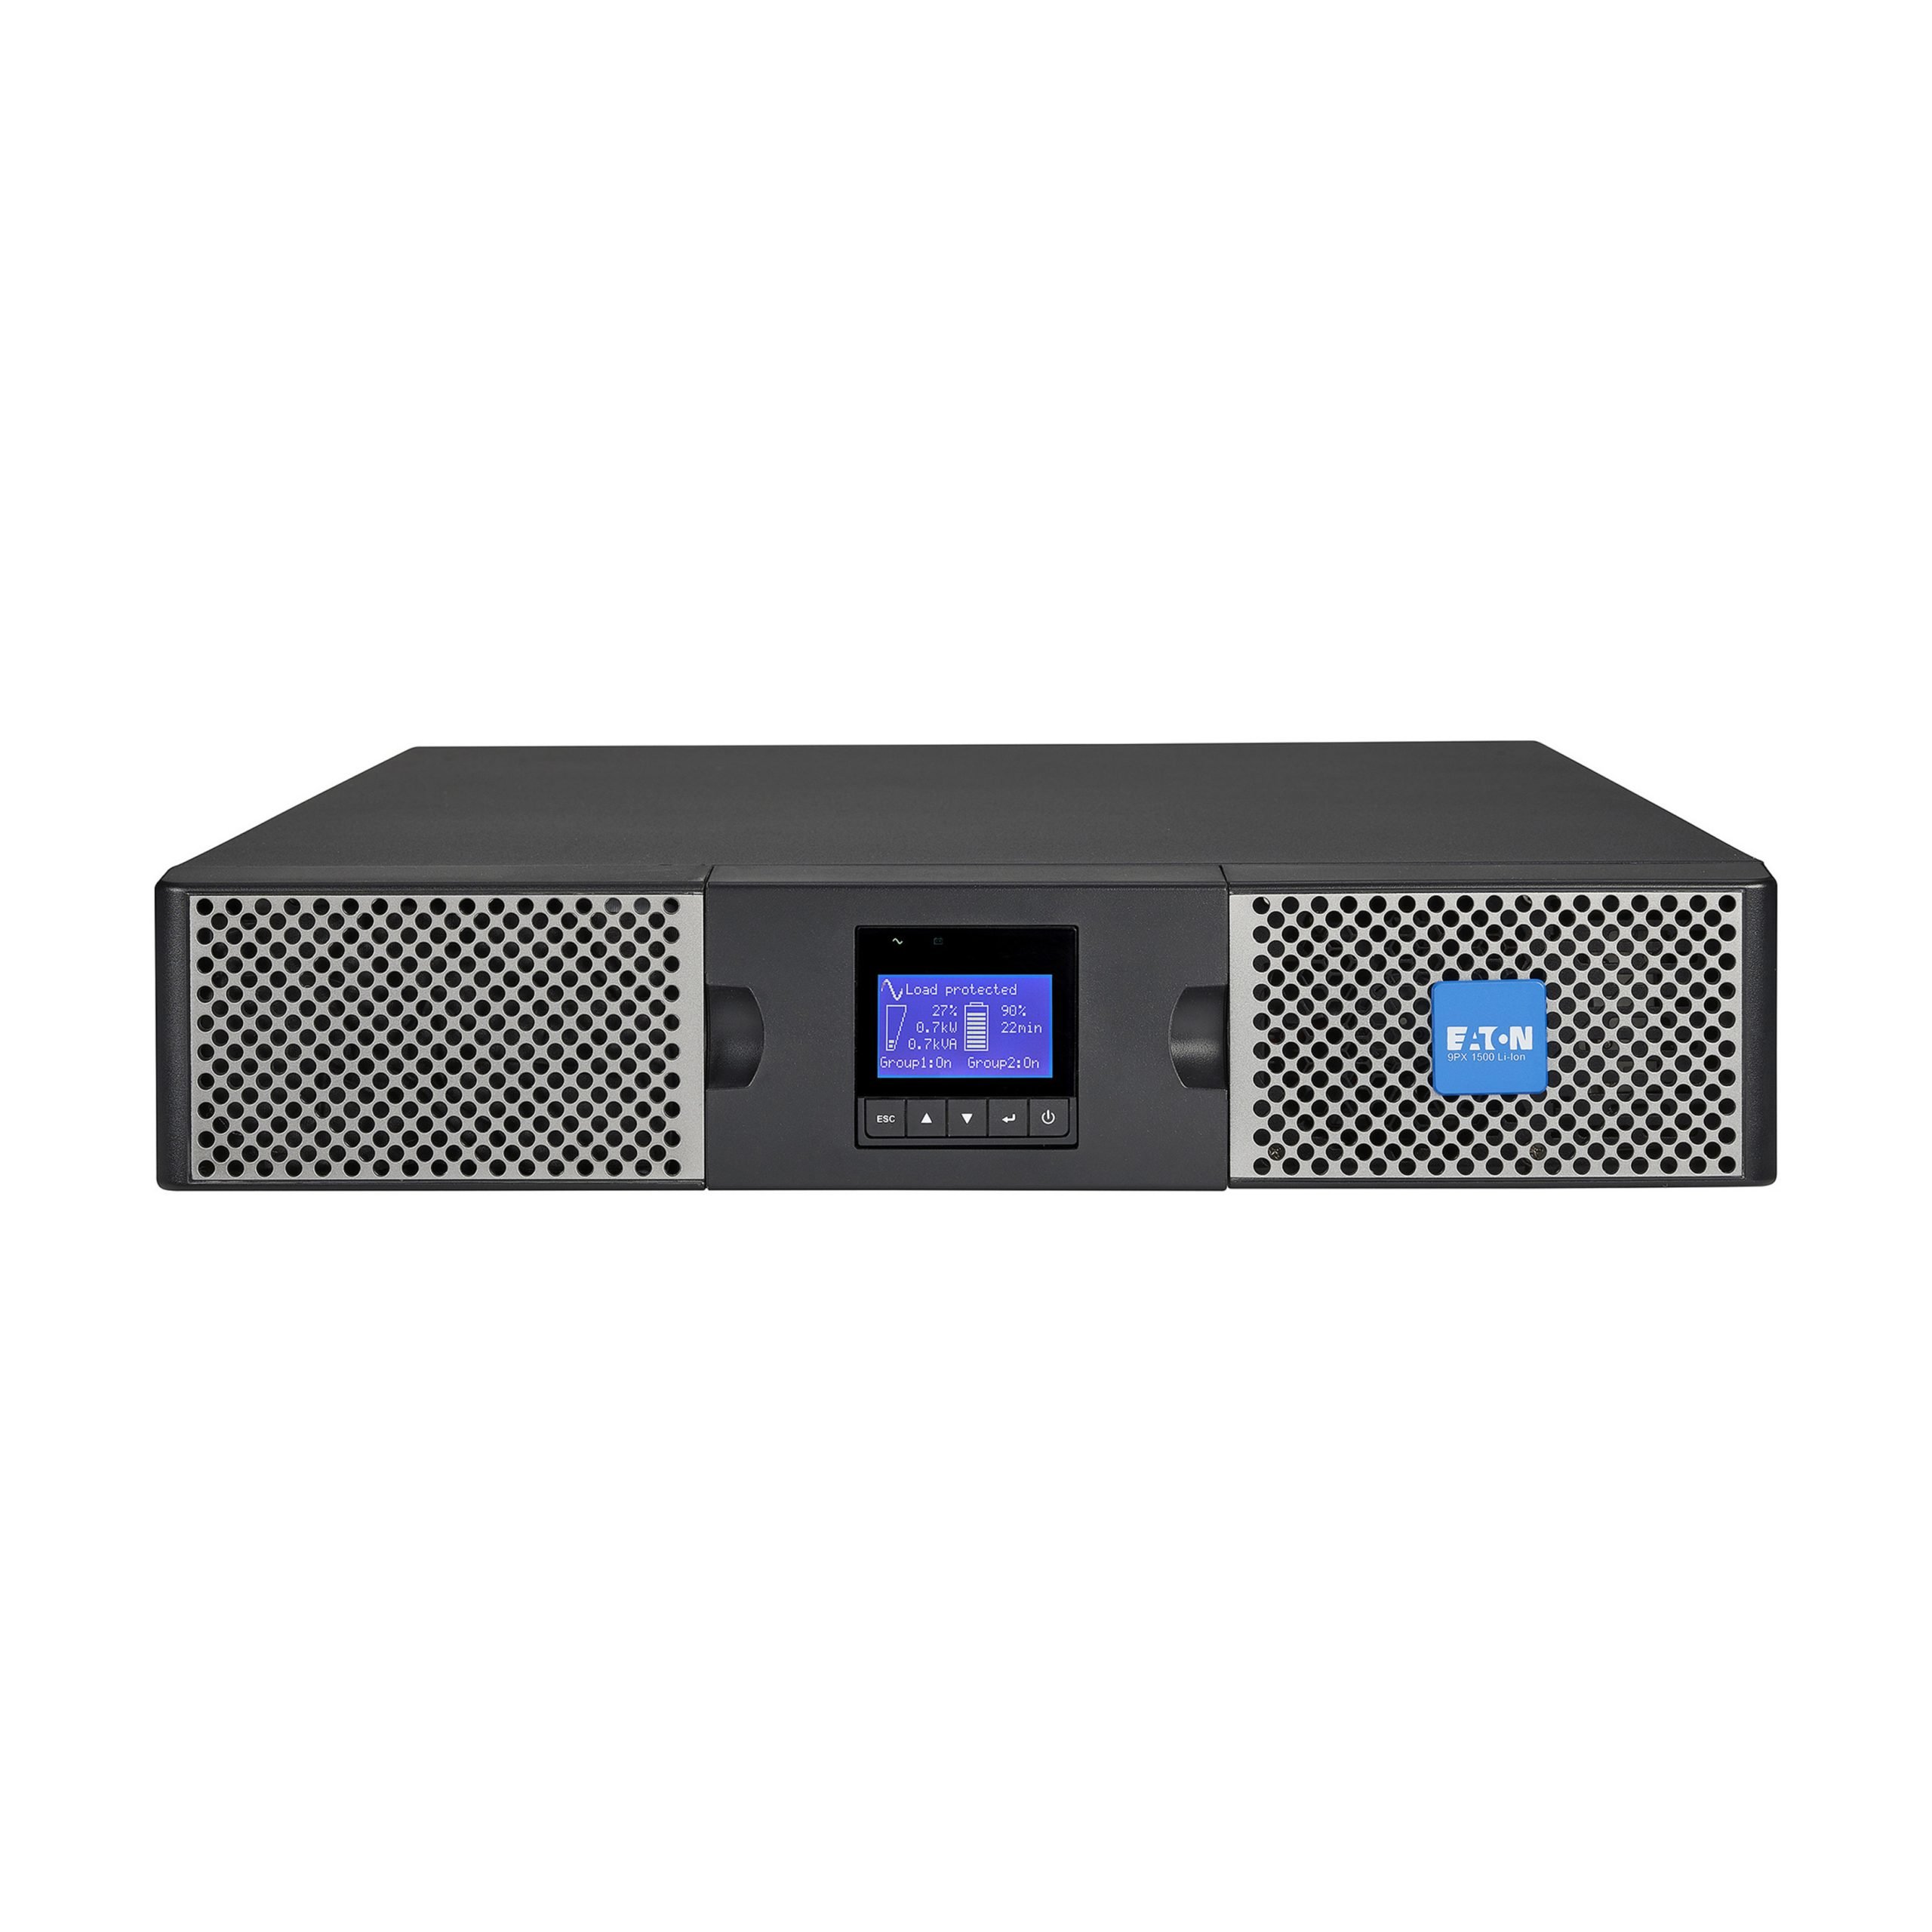 Eaton 9PX Lithium-Ion UPS 1500VA 1350W 208V 9PX On-Line Double-Conversion  UPS8 C13 Outlets, Network Card Option, USB, RS-232, 2U Rack/To  9PX1500GRT-L - Corporate Armor